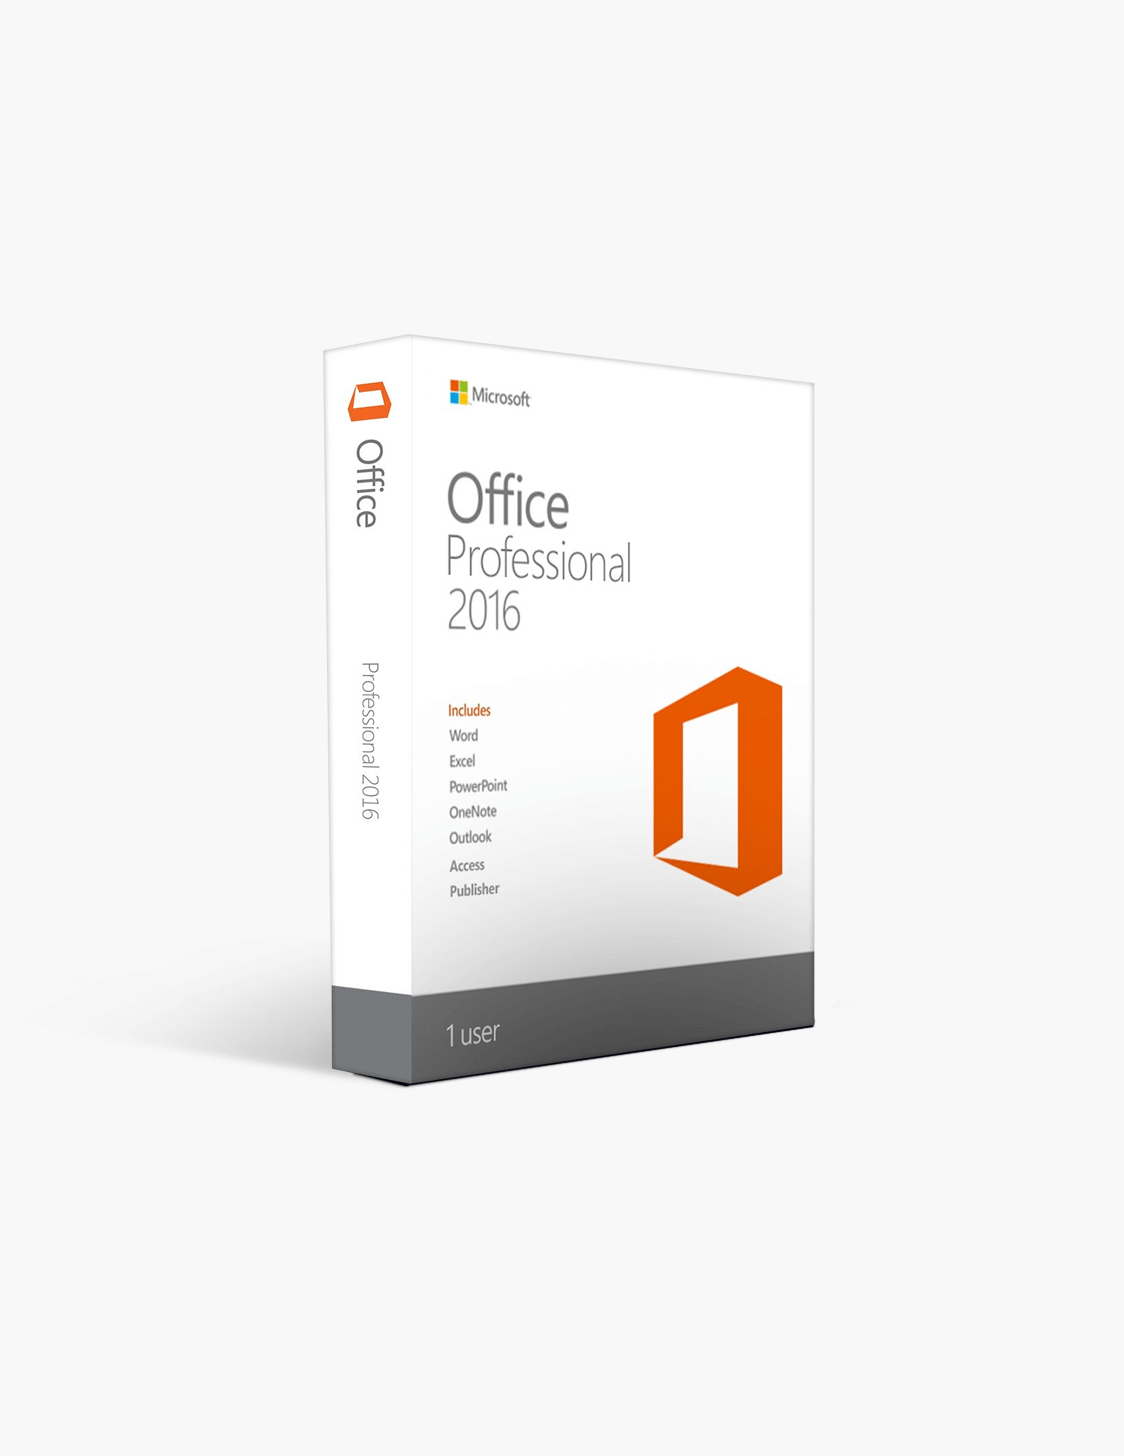 Office Professional 2016 price